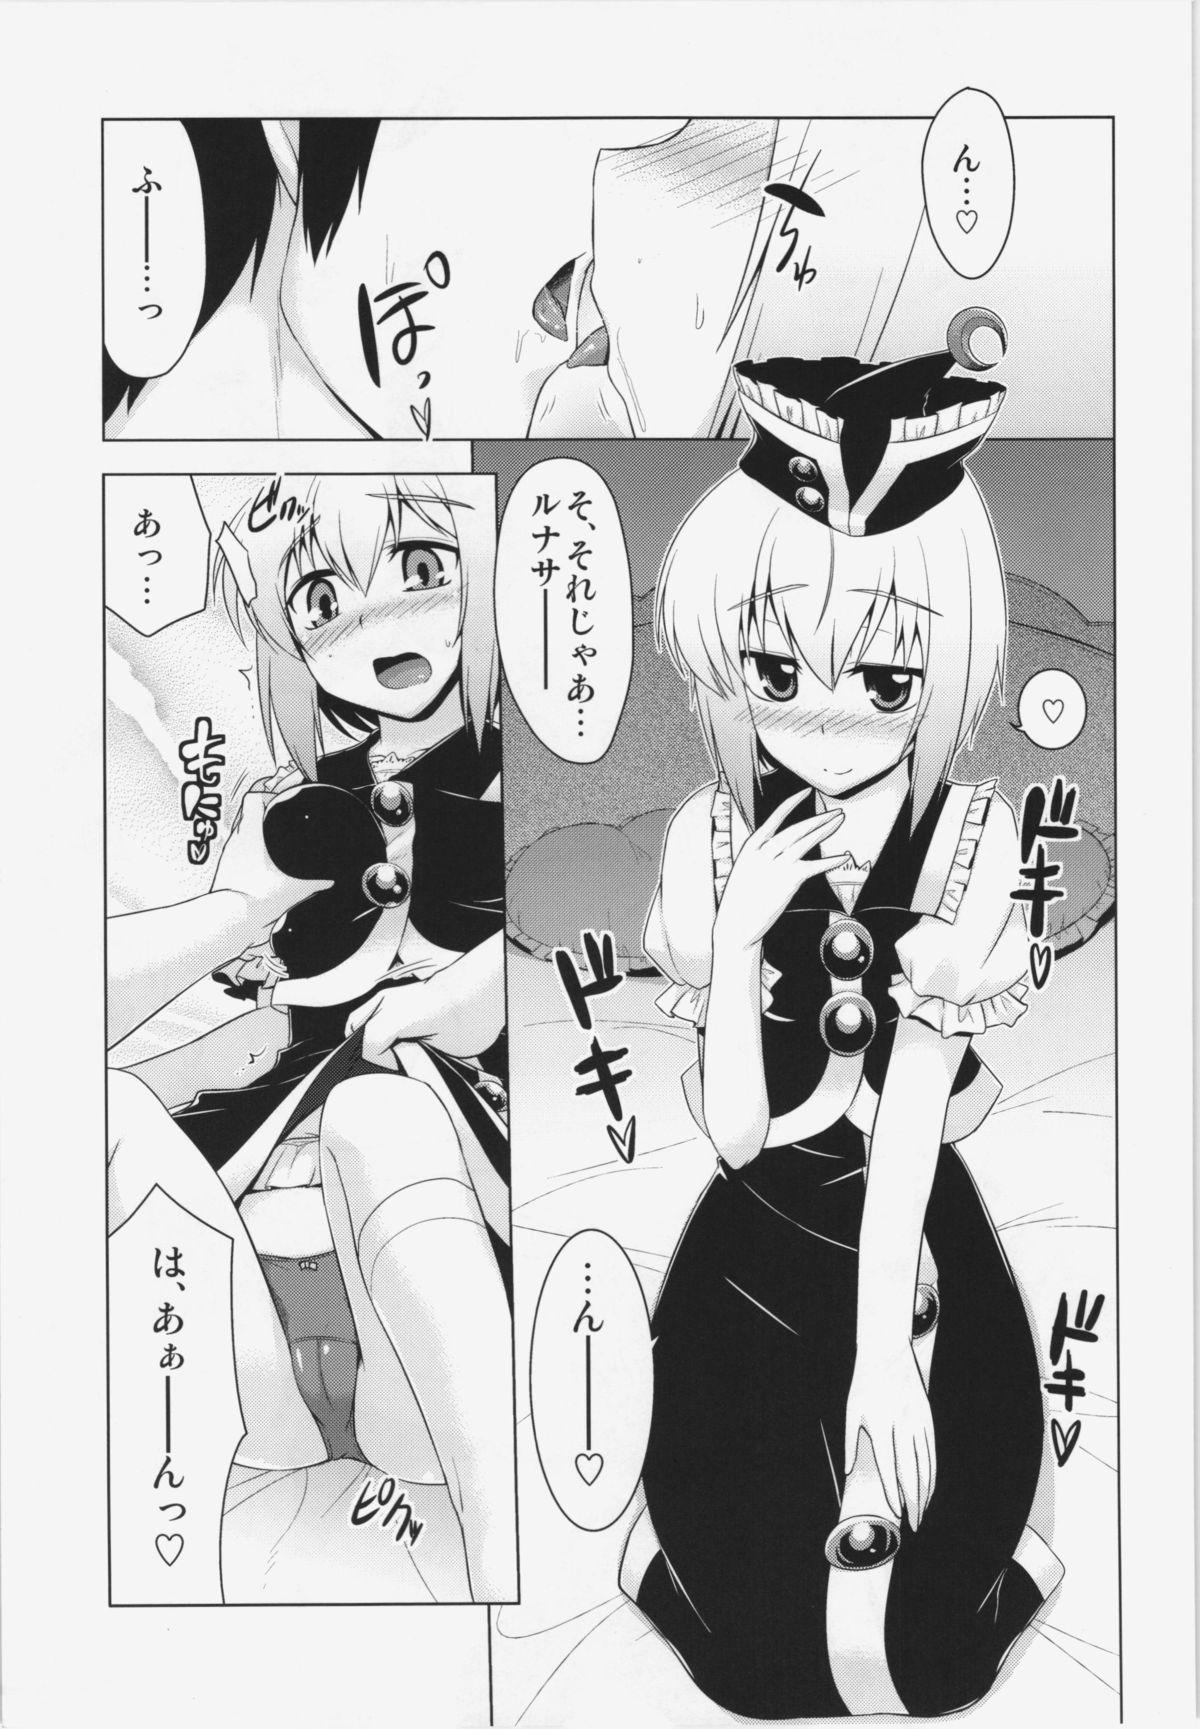 Chacal Luna Bunny Live - Touhou project Private Sex - Page 3